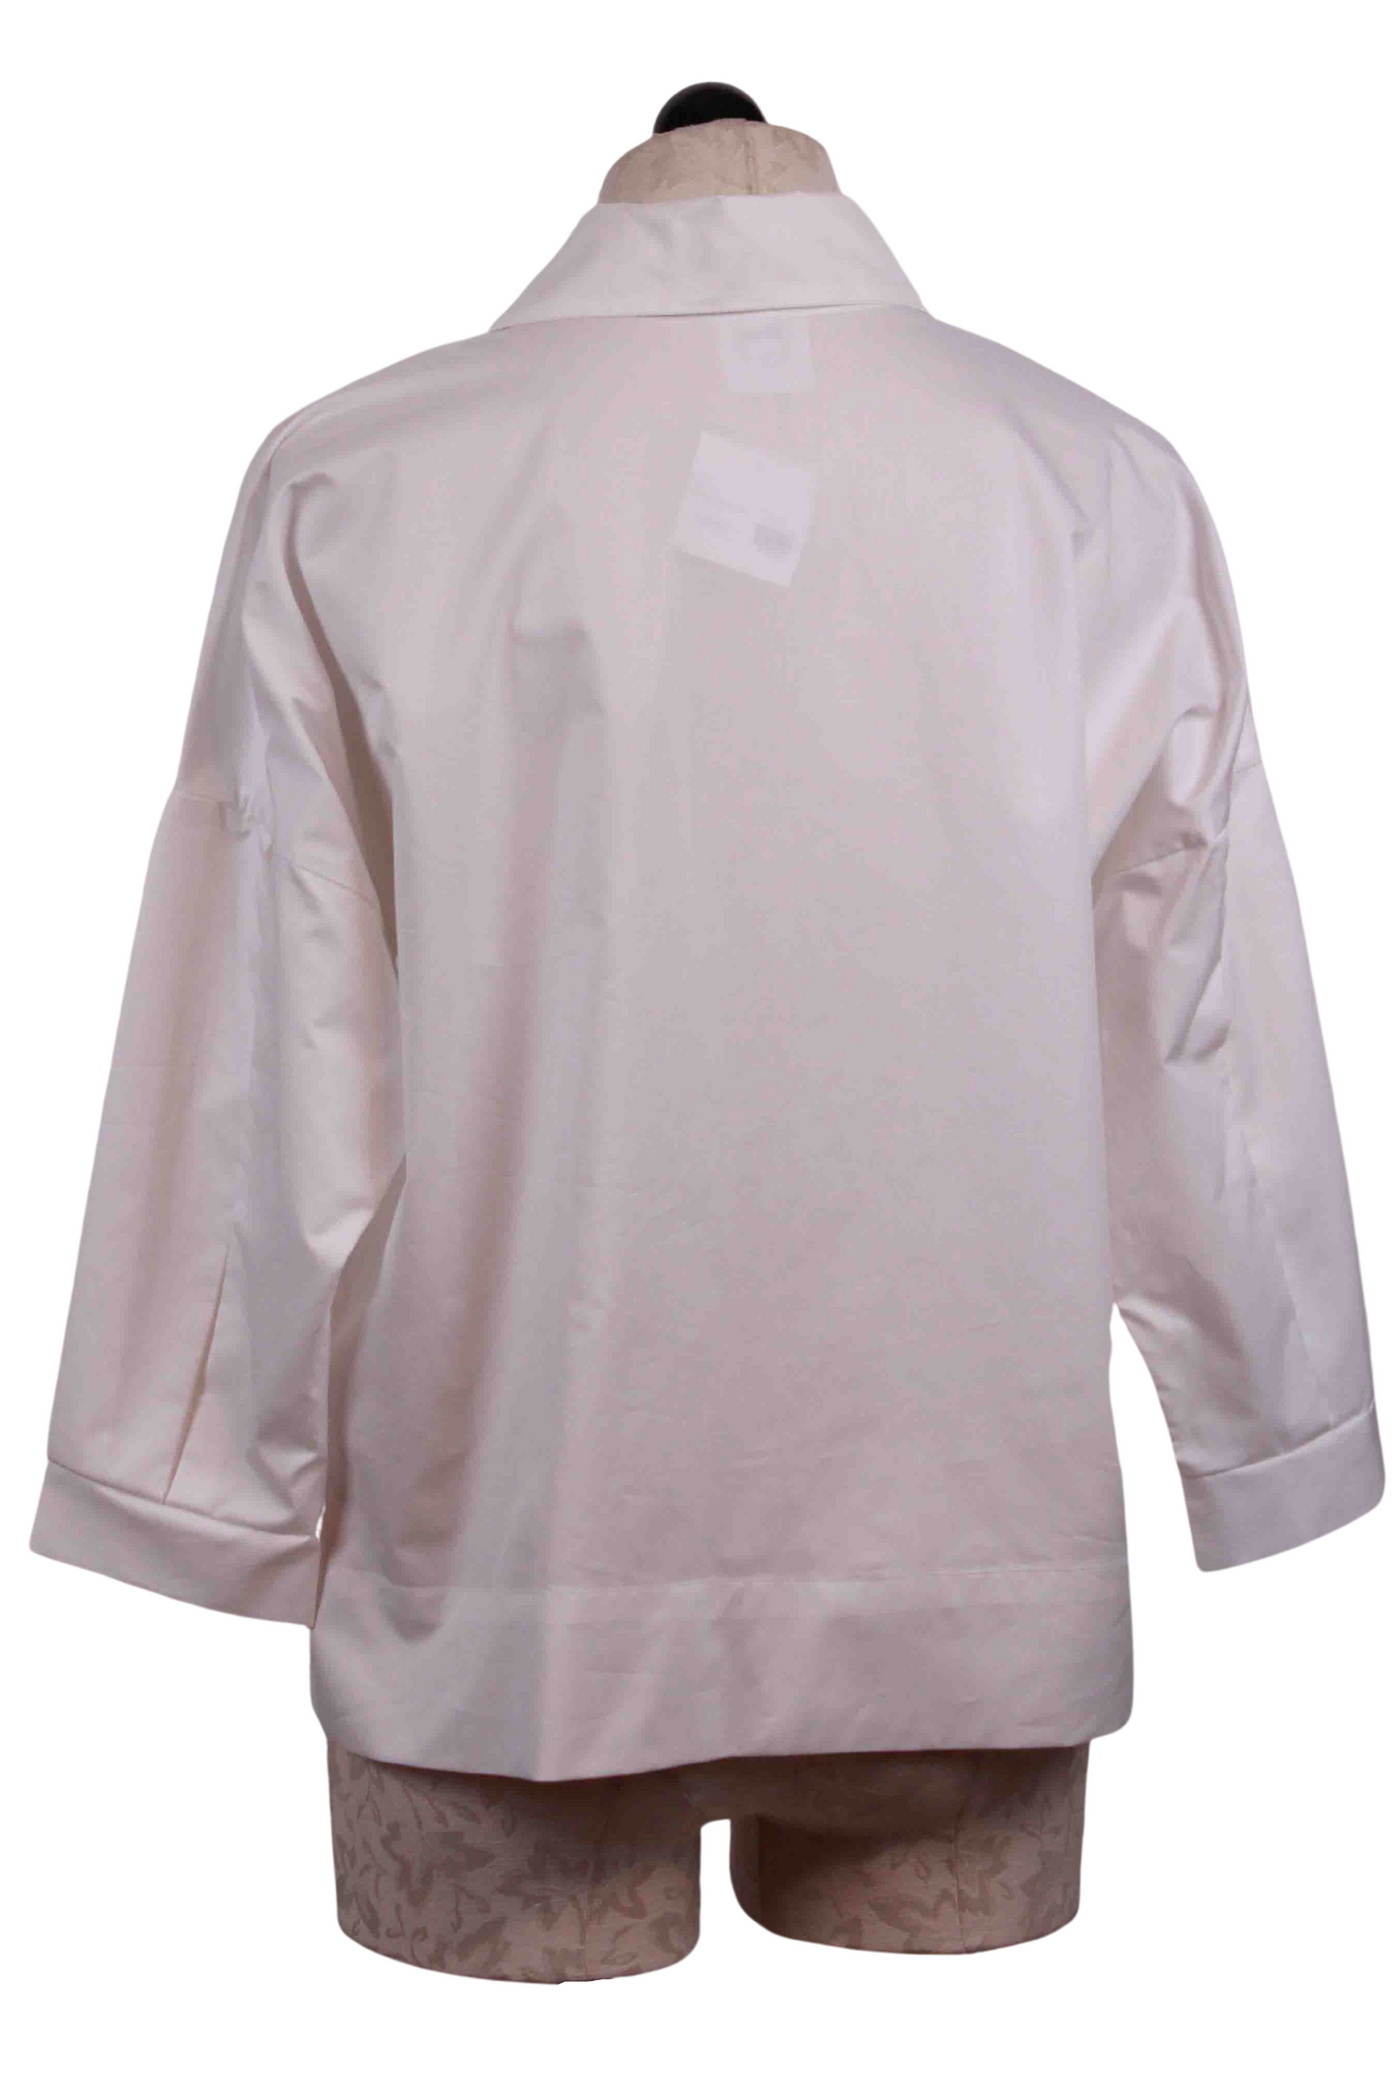 back view of White Pleat Sleeve Button Up Blouse Shirt by Planet